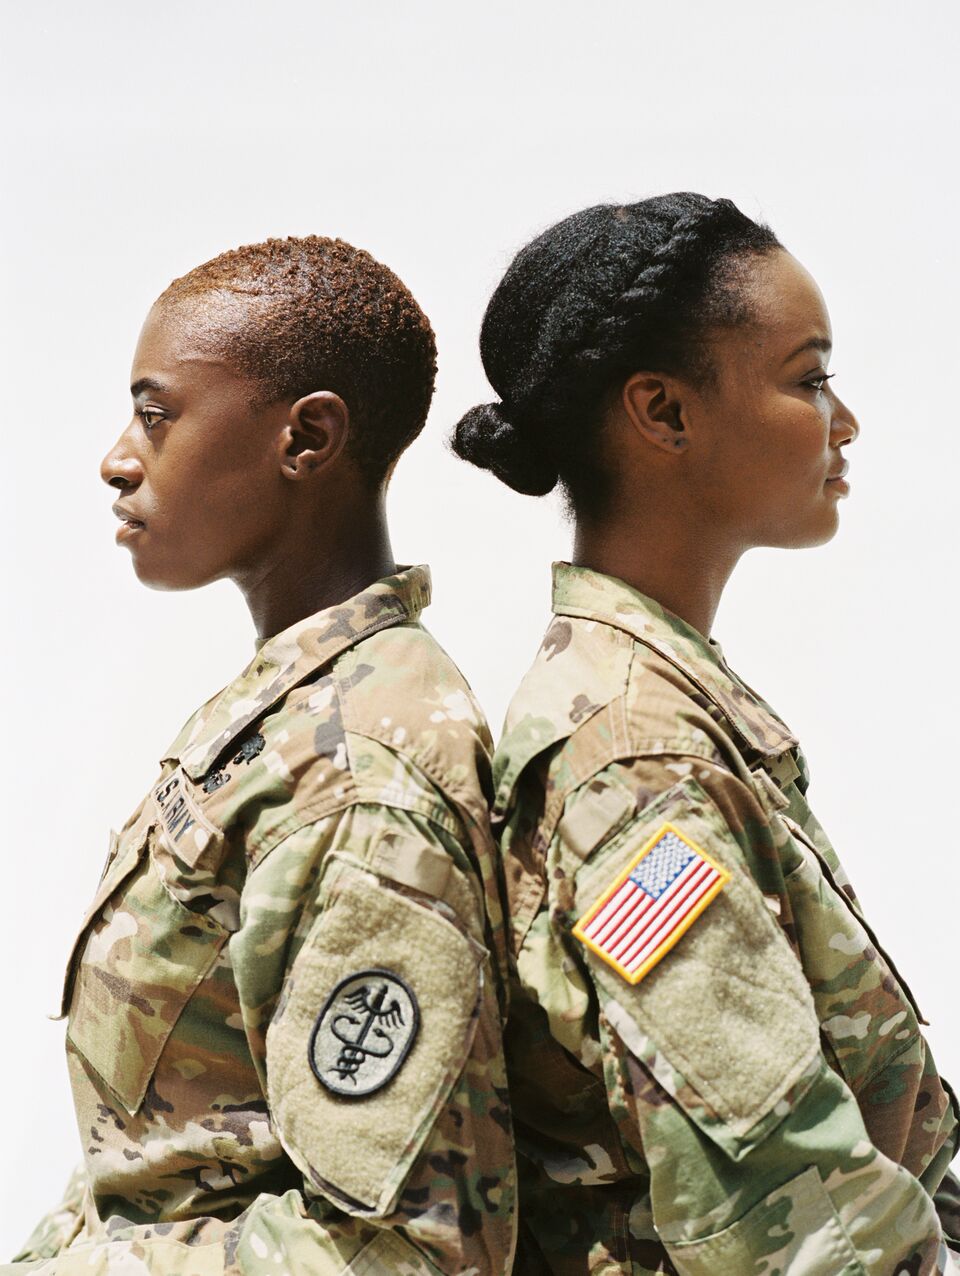 These Black Women In The Military Are Using Their Natural Hair to Make a Powerful Statement